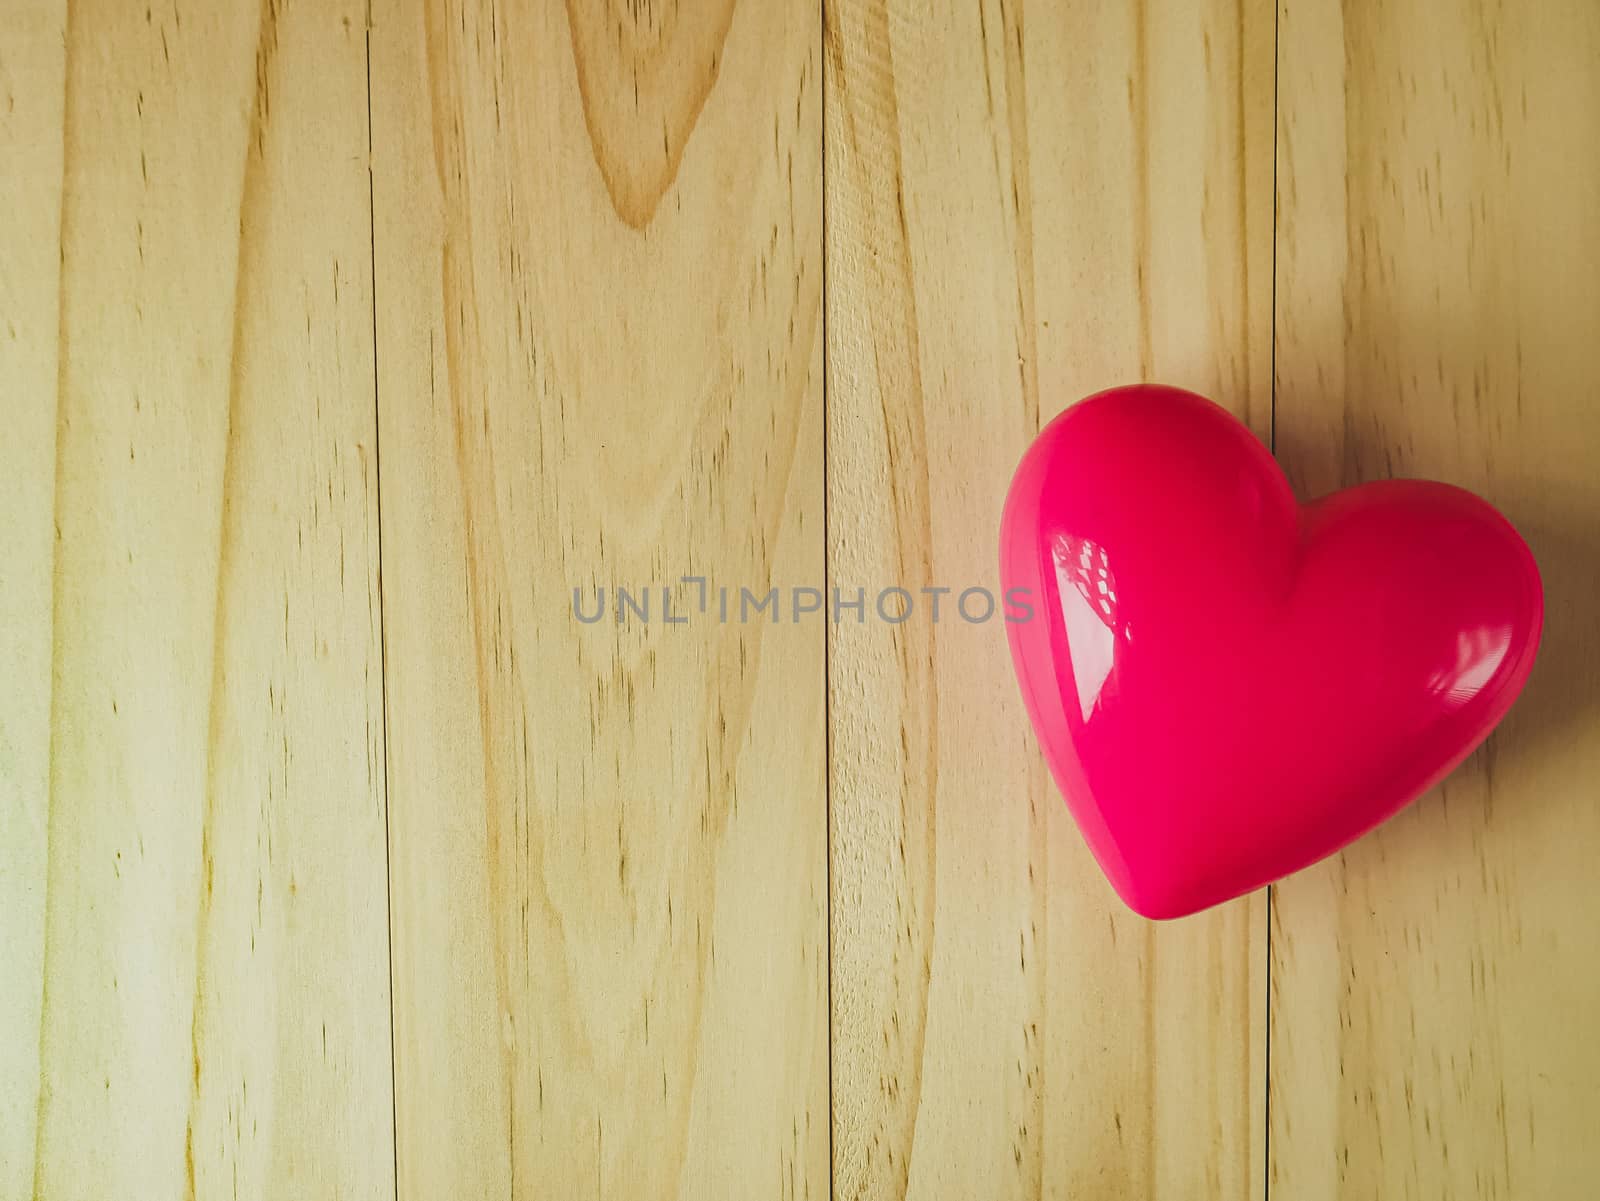  pink heart on wood table for Health and medical content.
 by Niphon_13